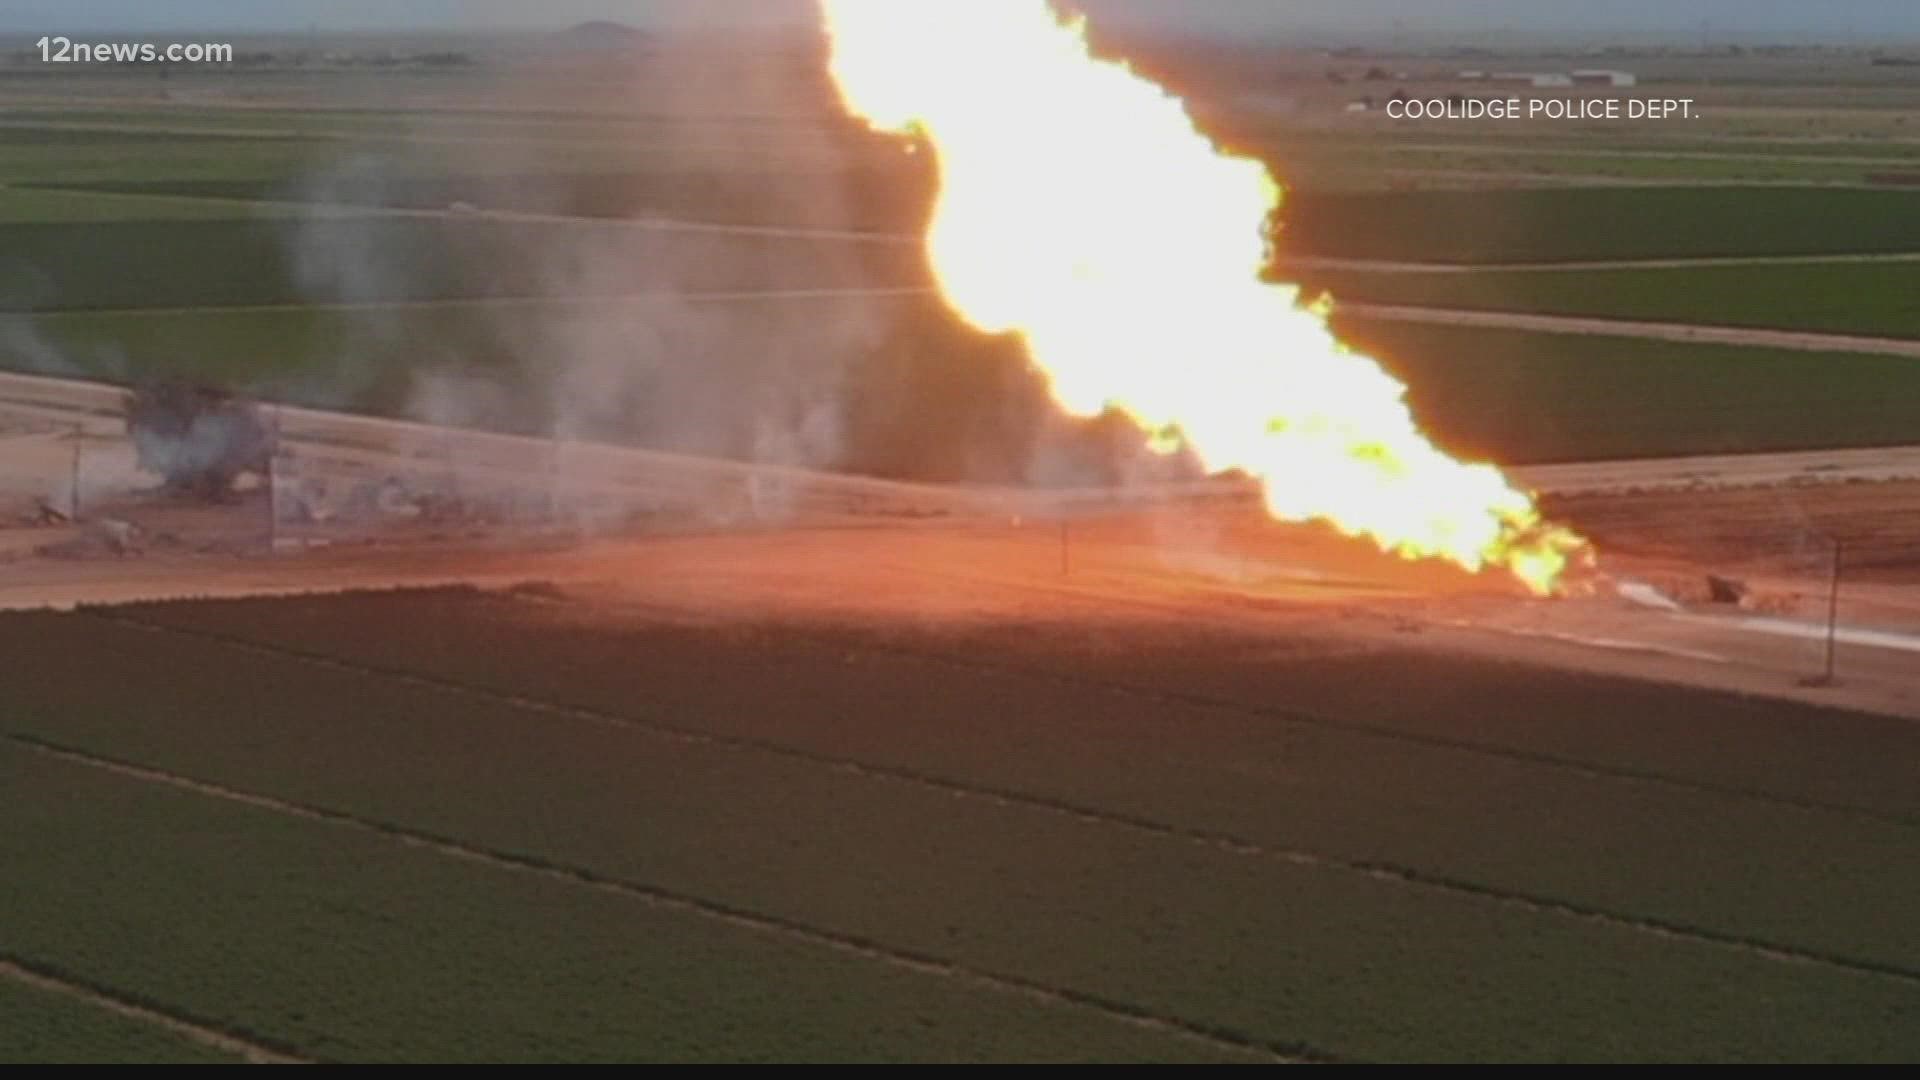 A pipeline safety expert believes Sunday's fatal explosion in Coolidge produced one of the largest "rupture cavities" they've ever seen.